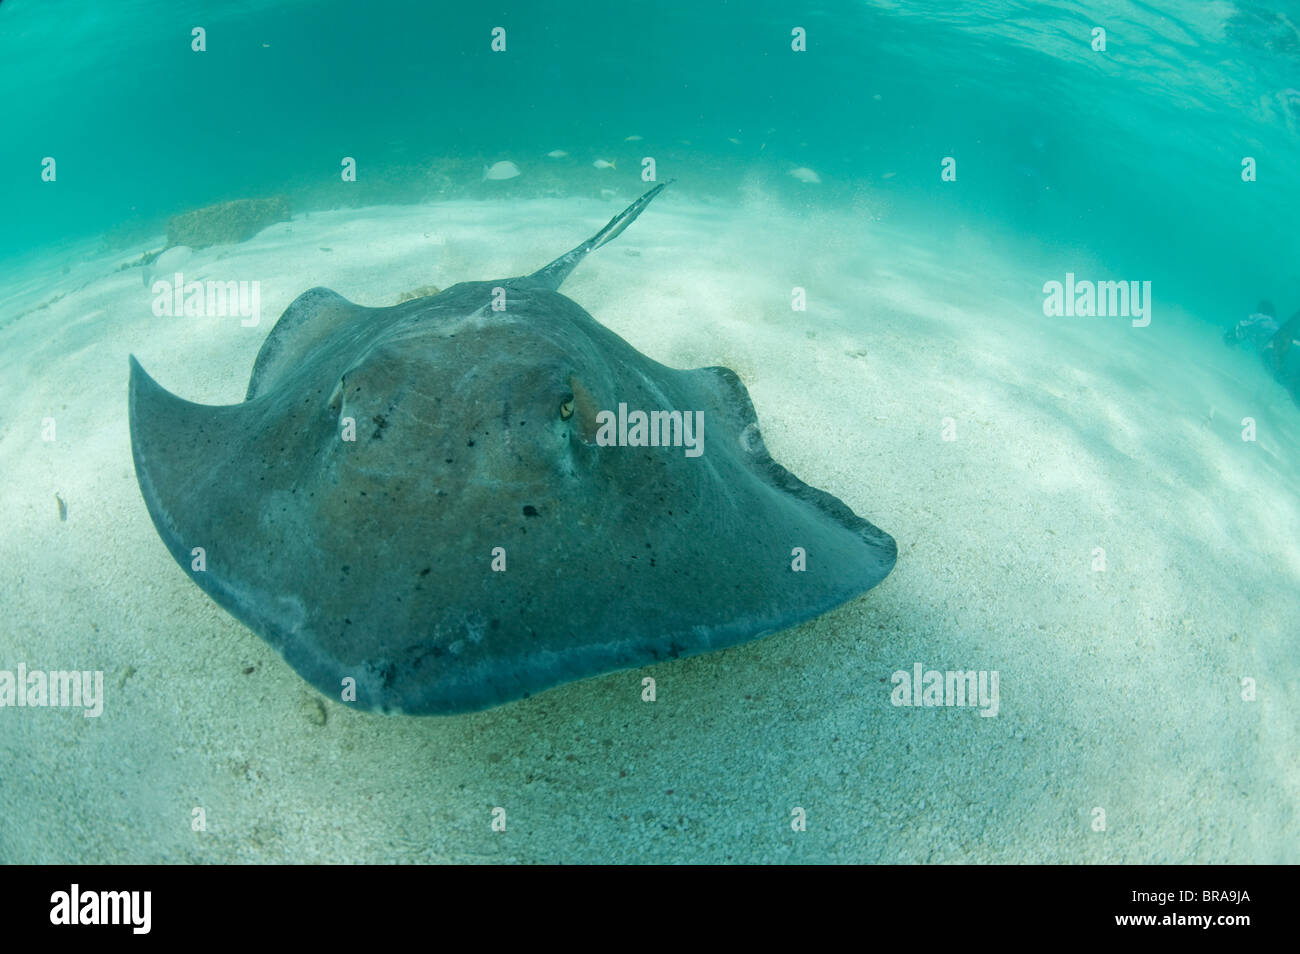 Types of Stingrays to Know - American Oceans